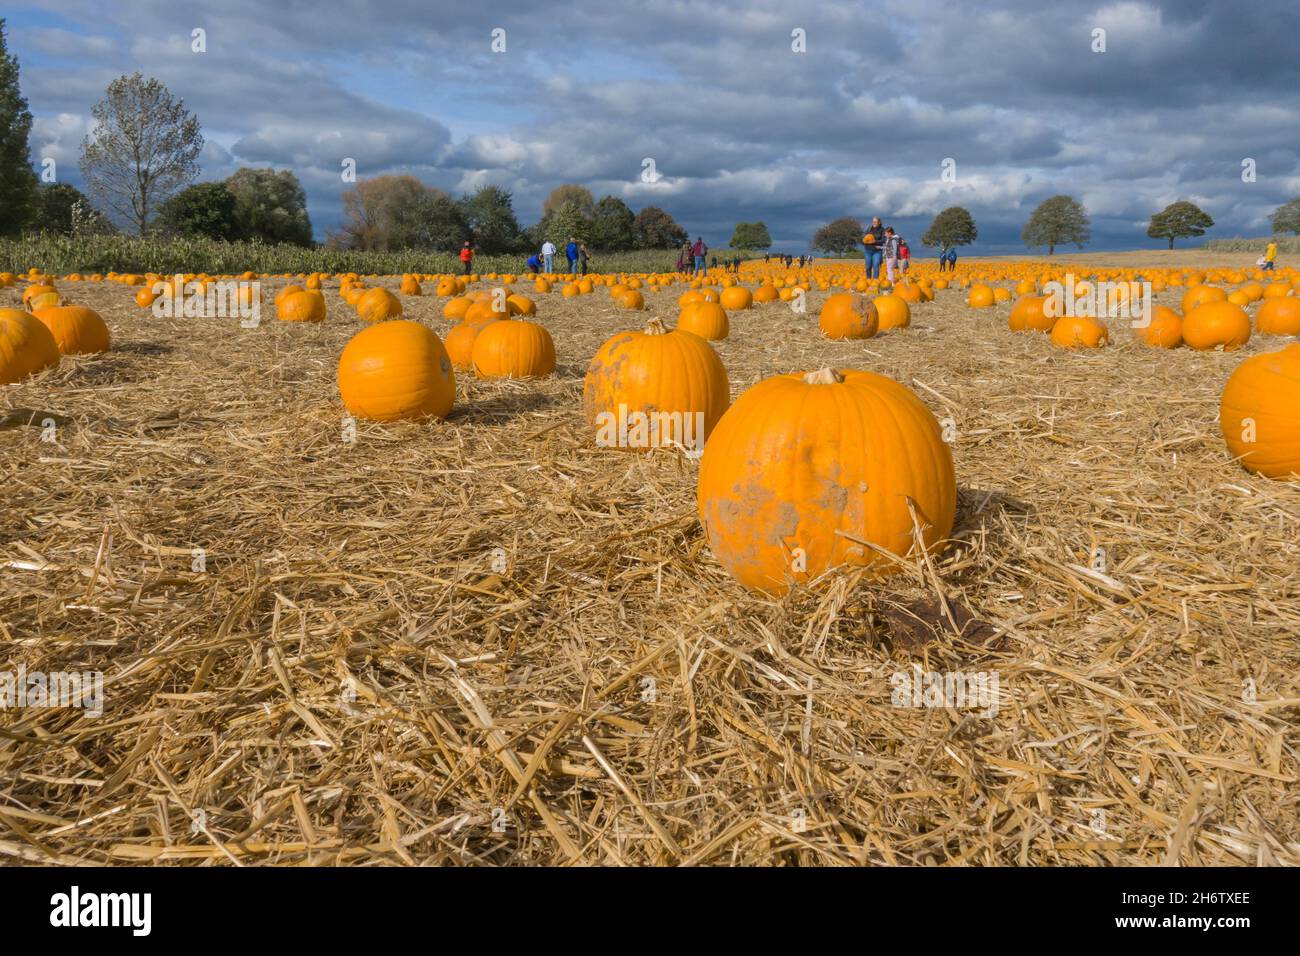 With Halloween aproaching families are out selecting their Pumpkins for the festivities, Devon UK. October 2021. Stock Photo